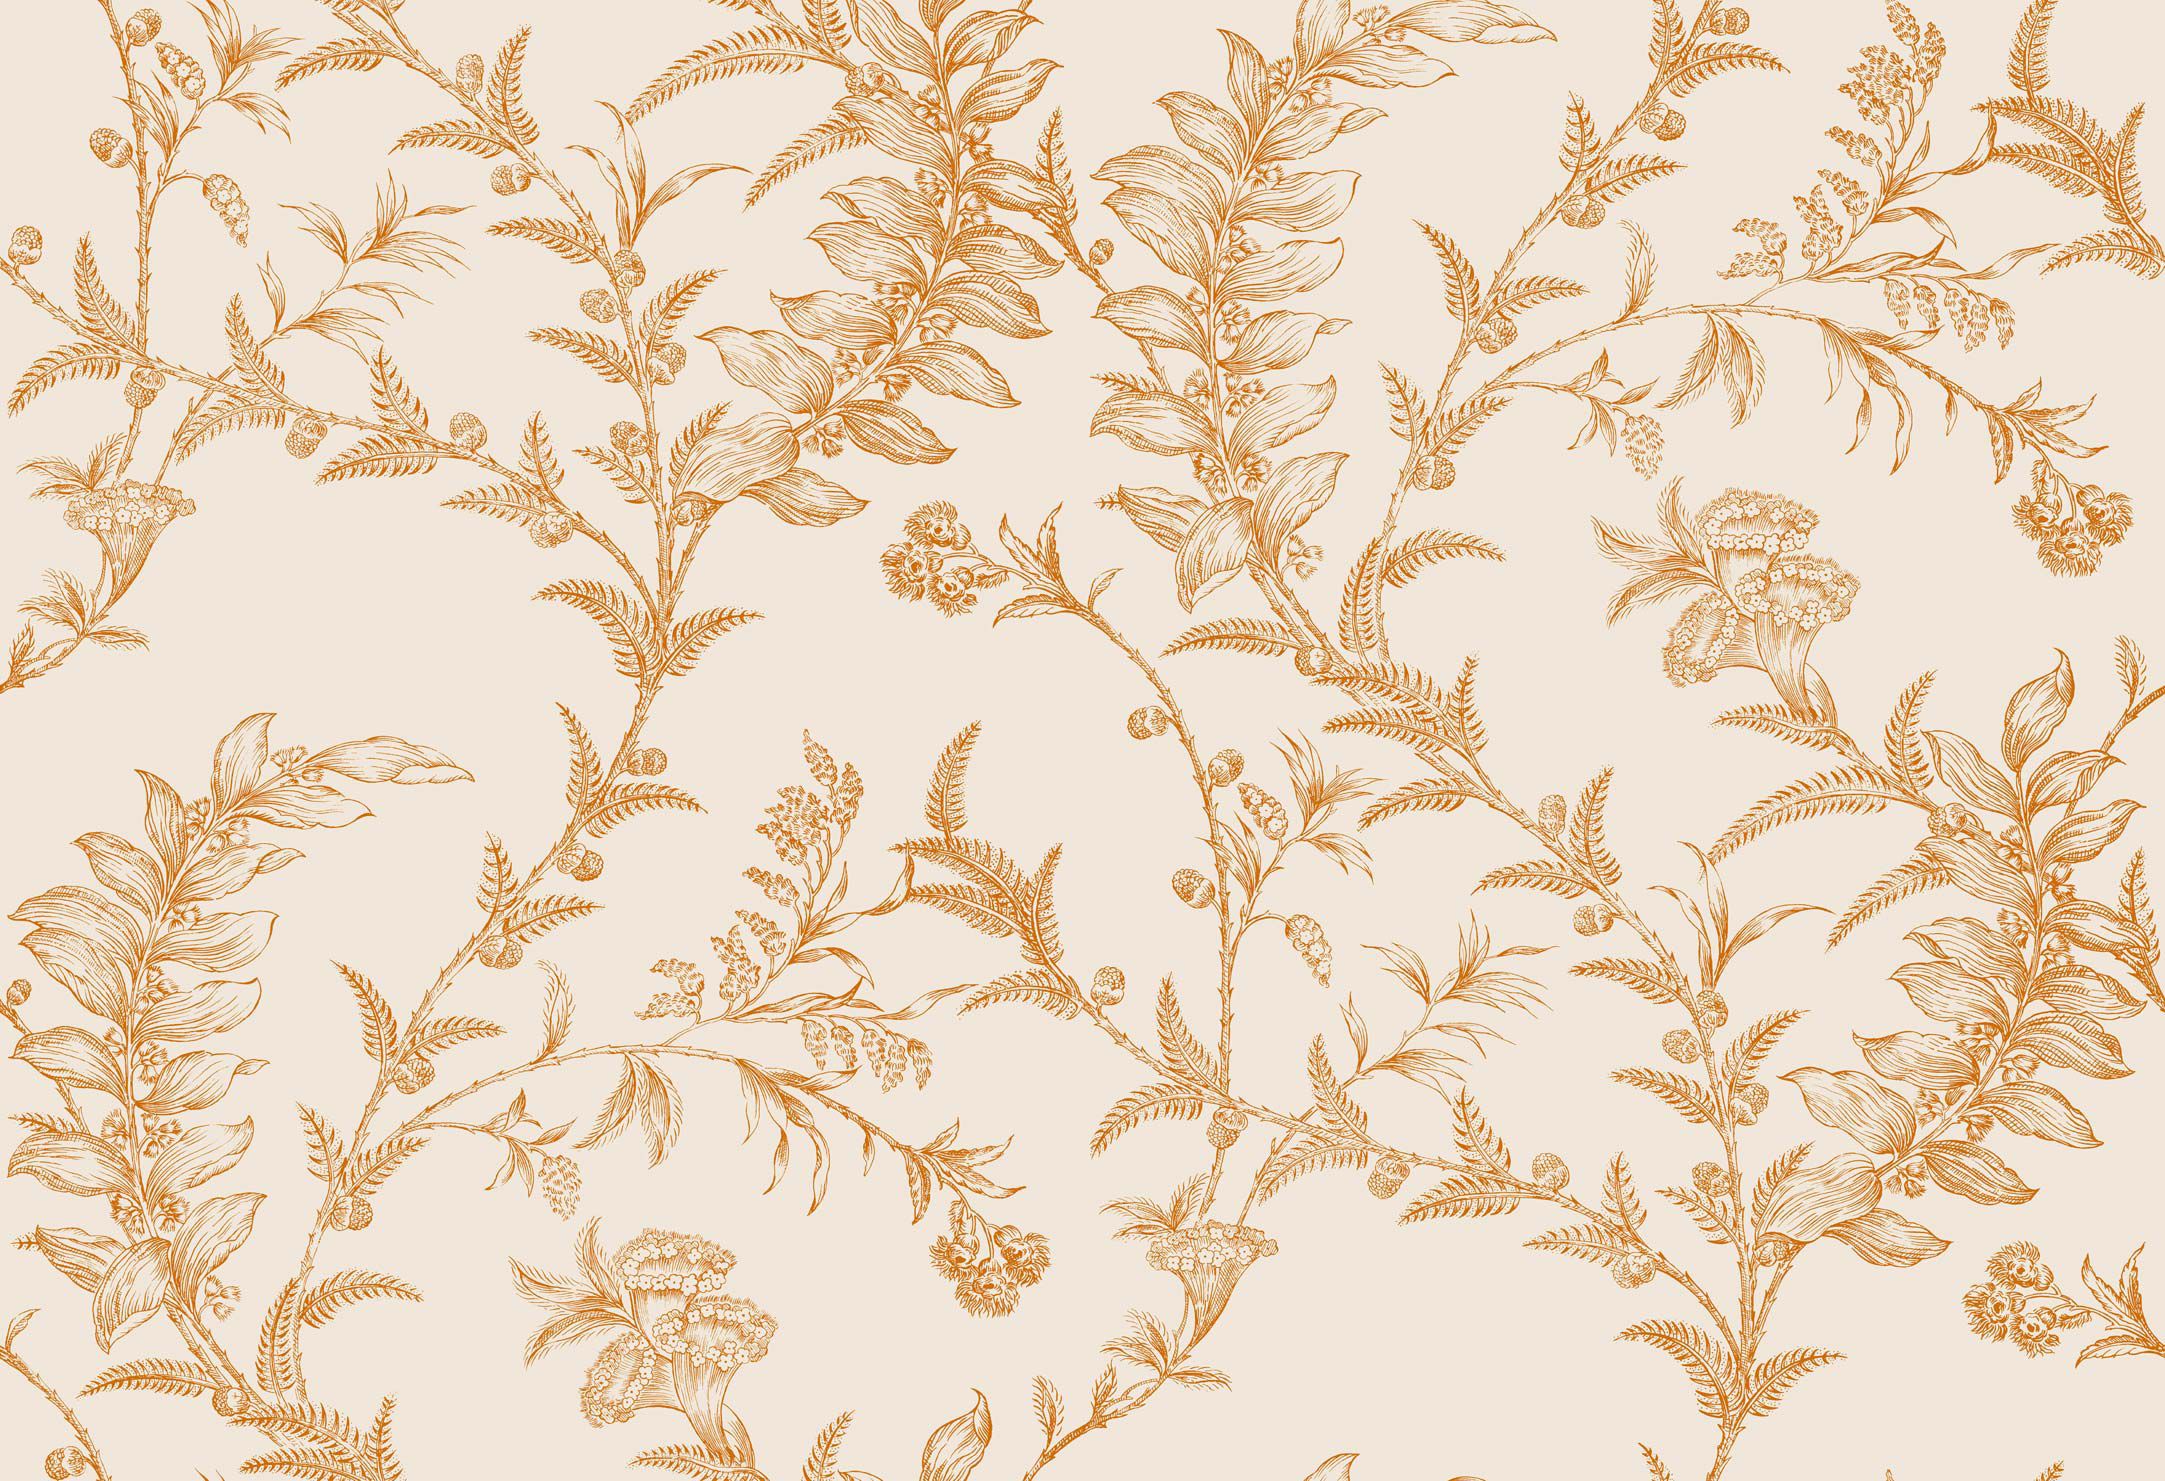 Nature pattern wallpaper / fabric / traditional - ARCHIVE ...